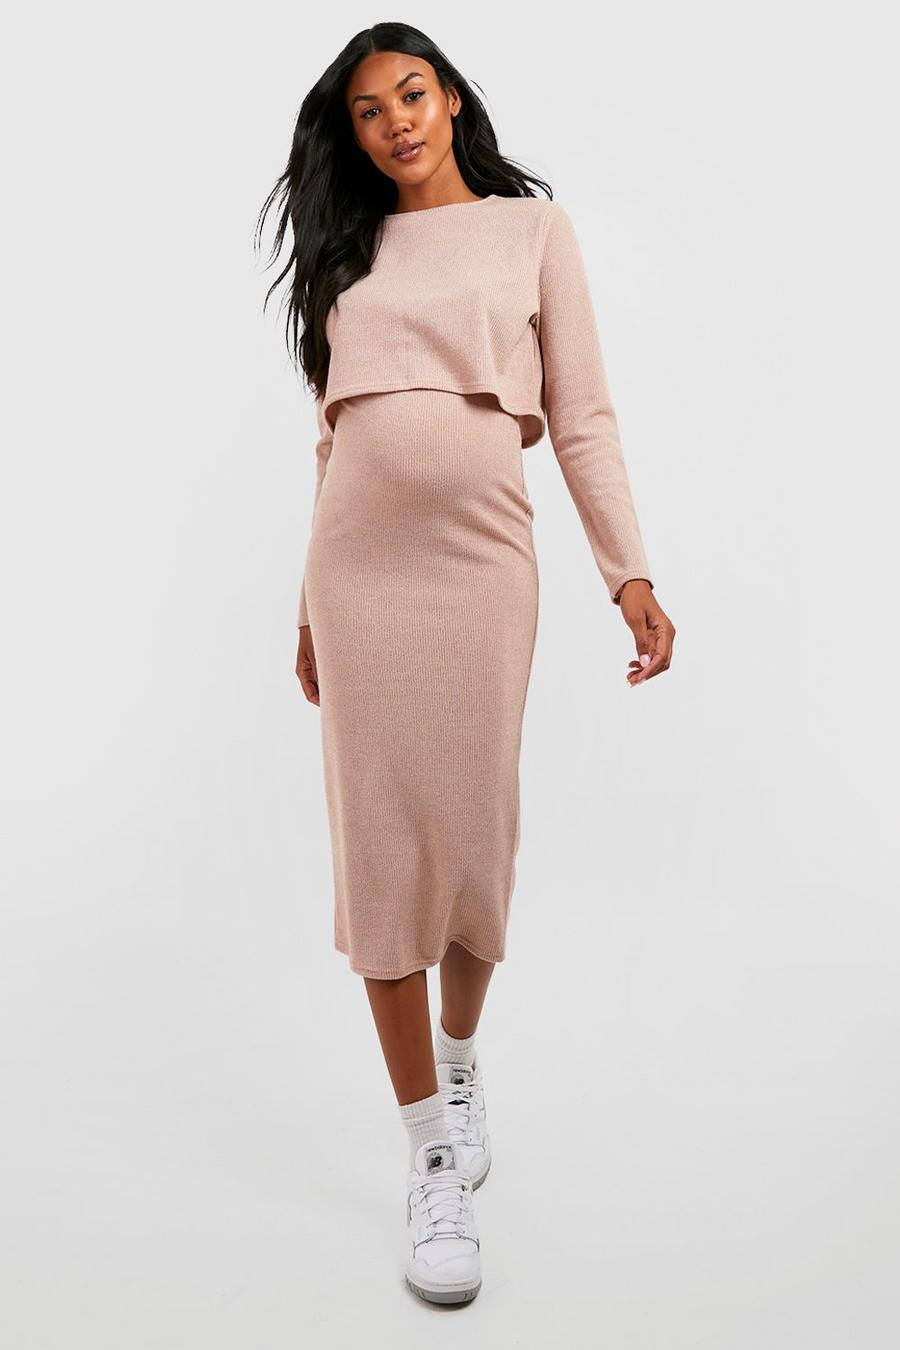 Camel beige Maternity Soft Knit Midaxi Skirt Co-ord